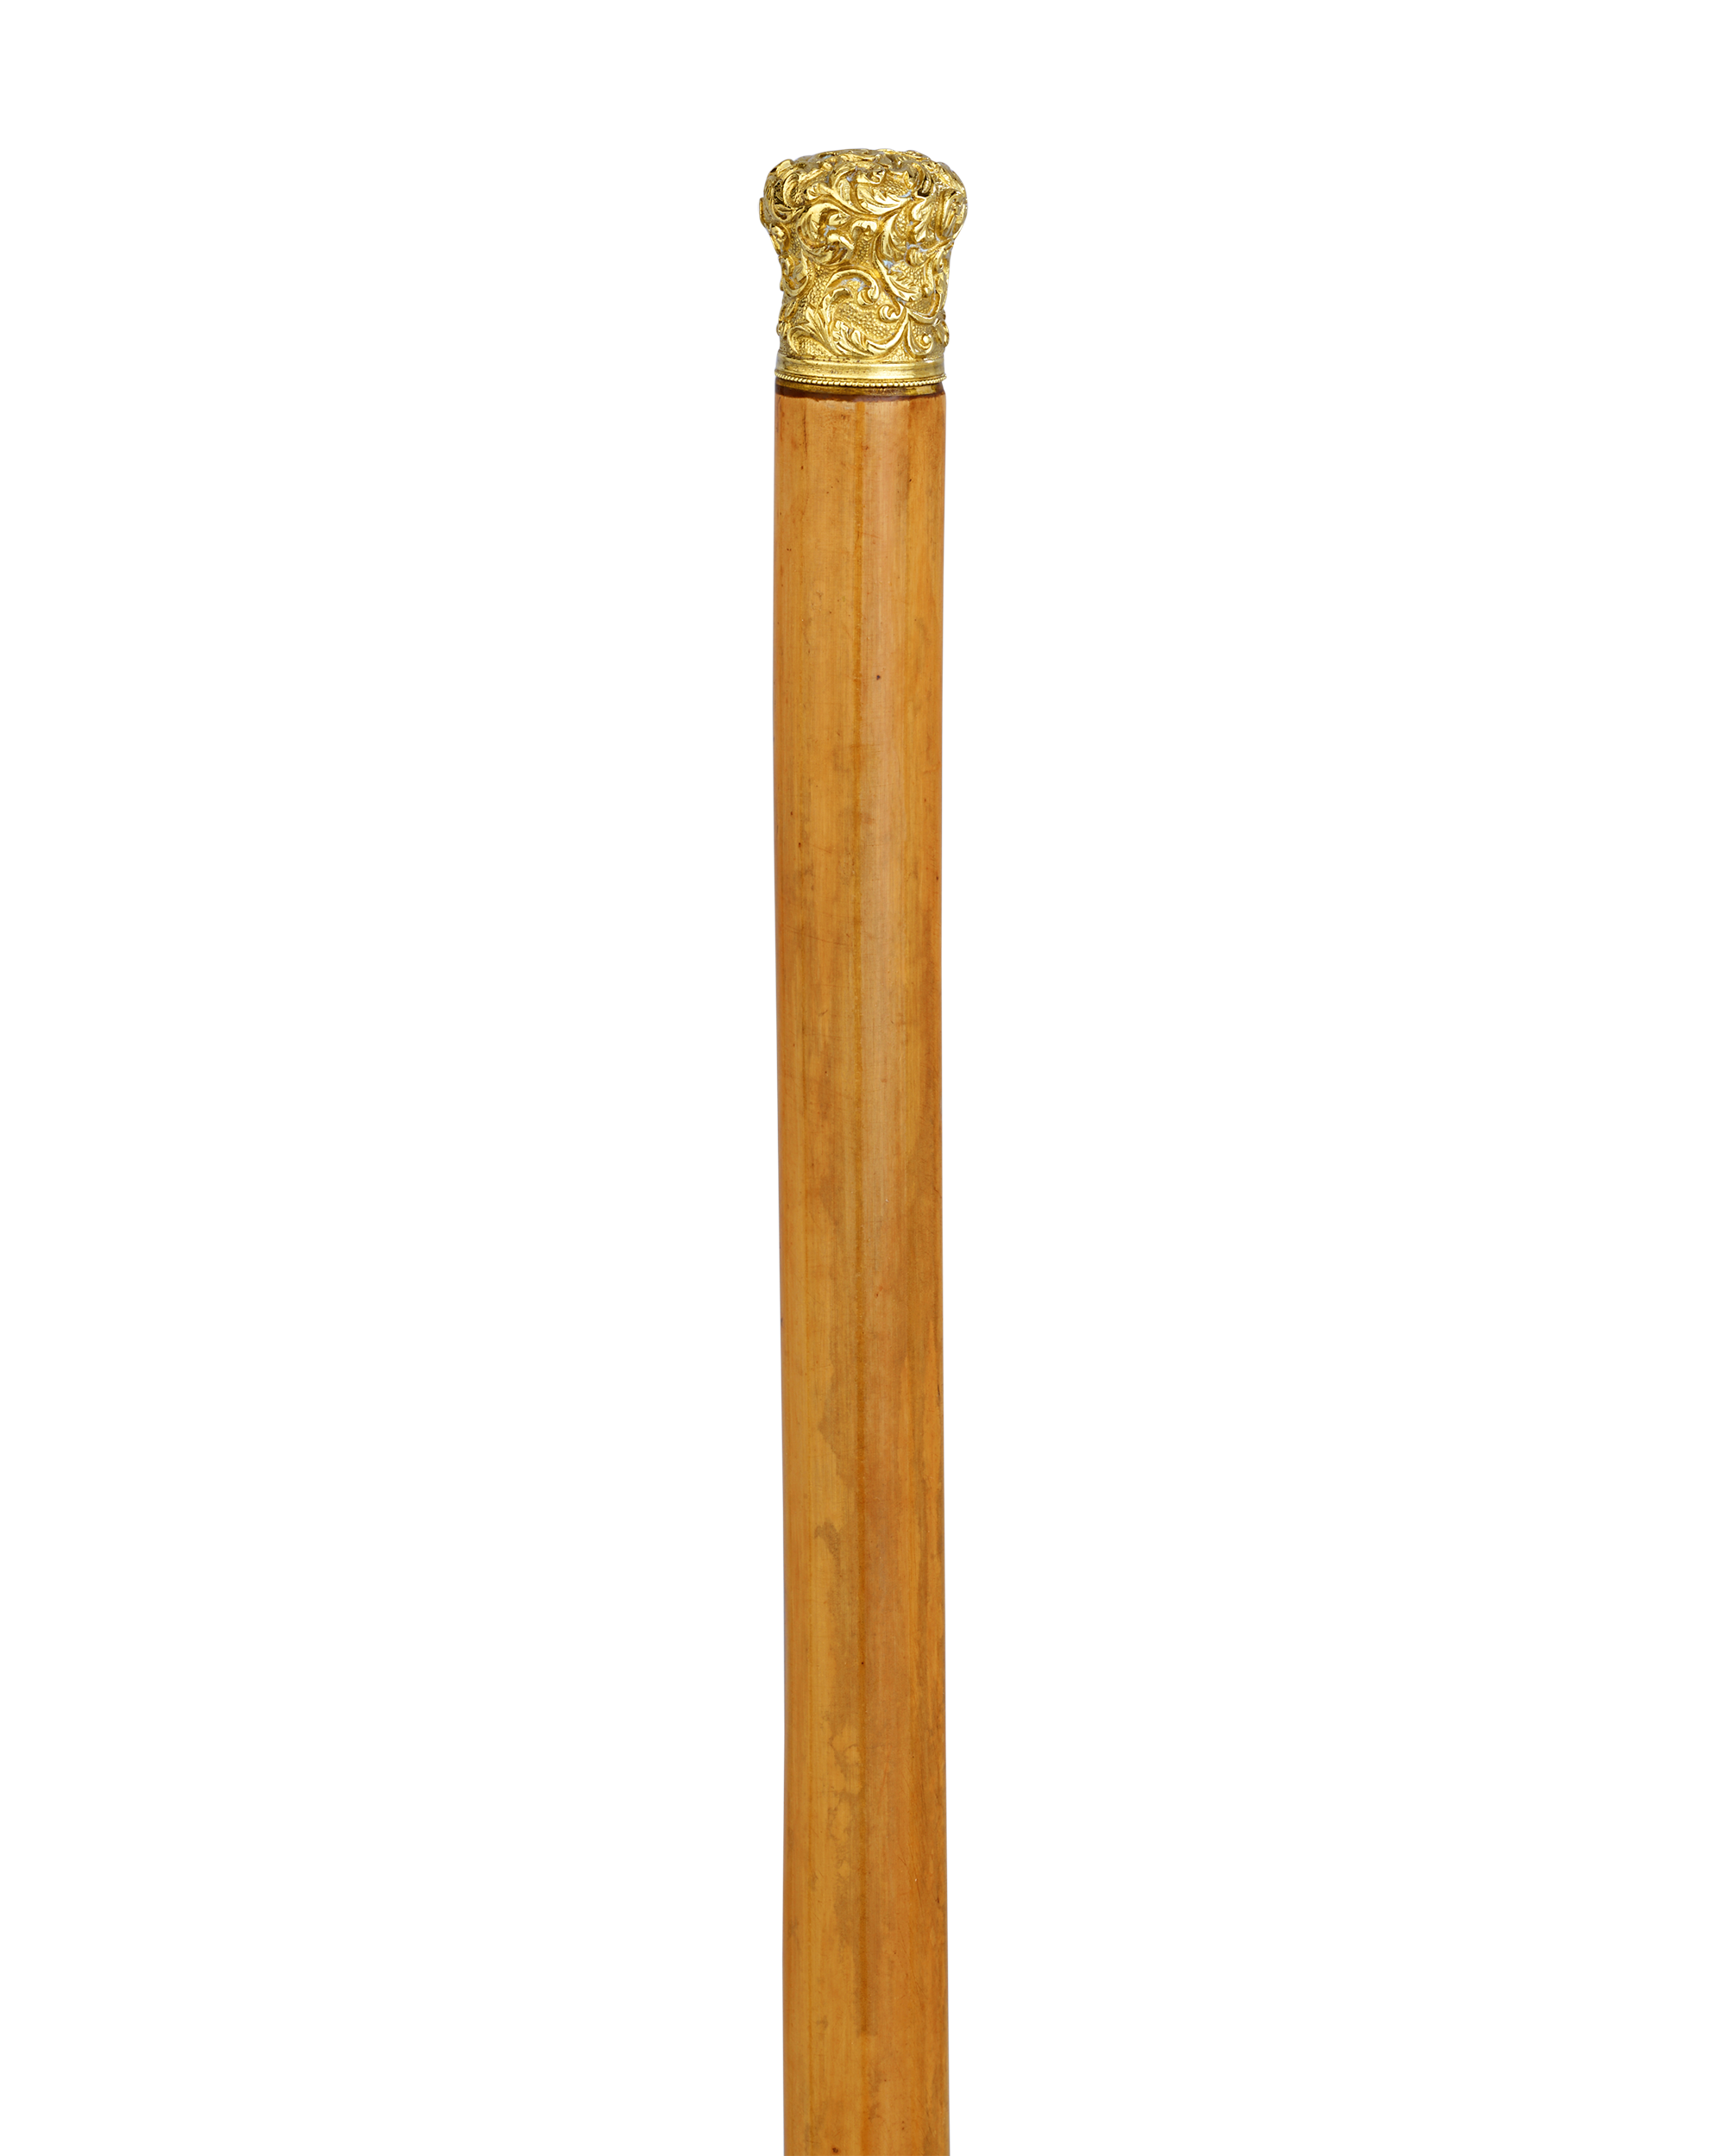 Perfume Cane with Golden Milord Knob